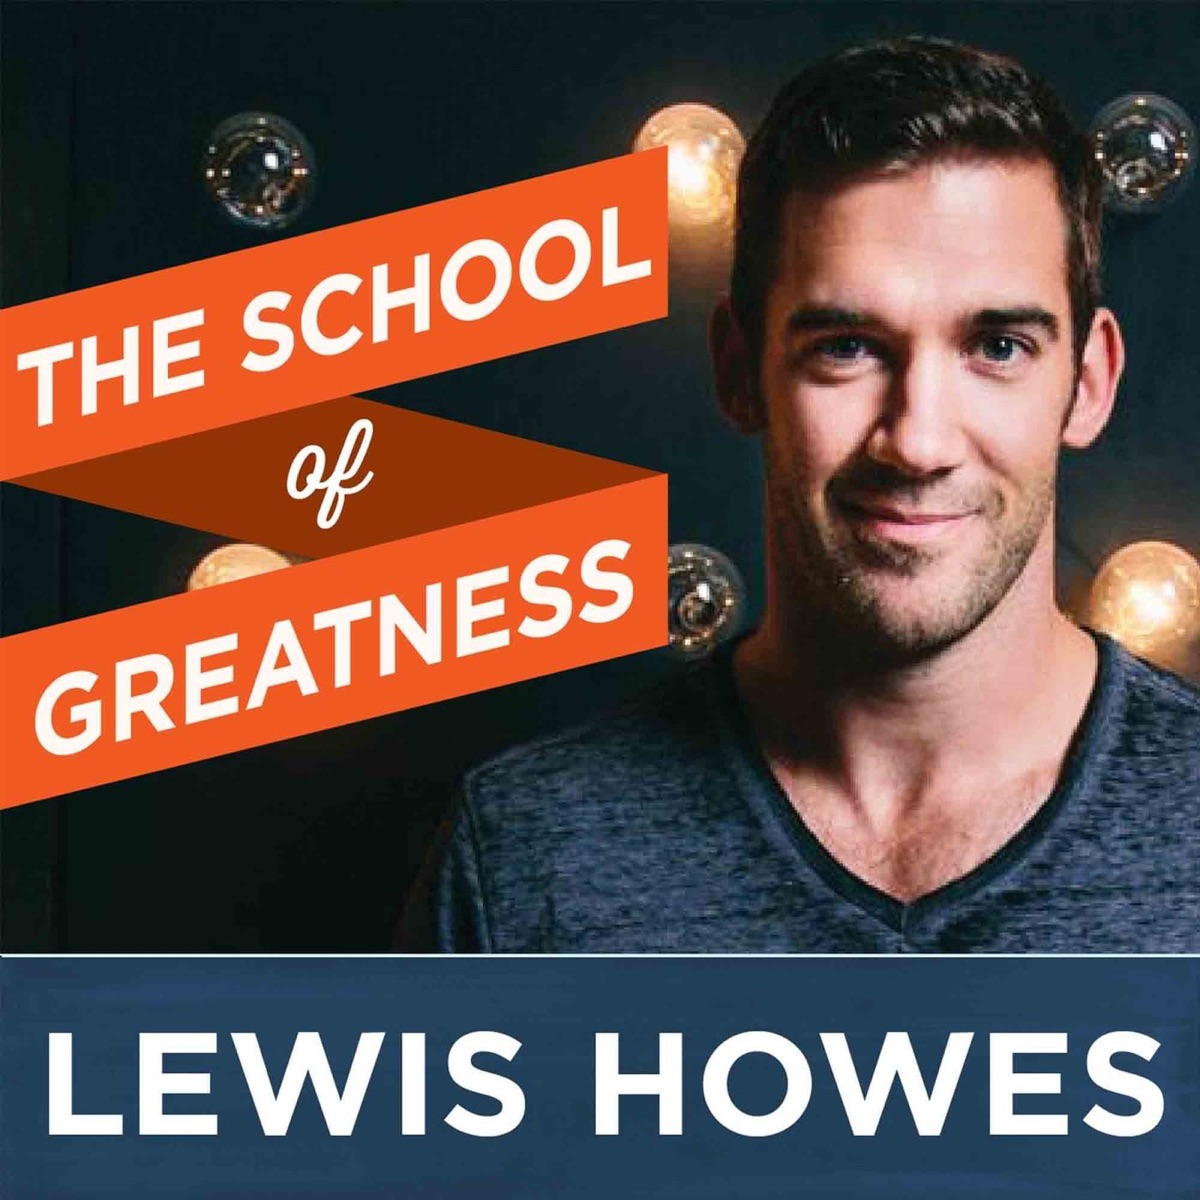 podcast thumbnail for 'The School of Greatness'